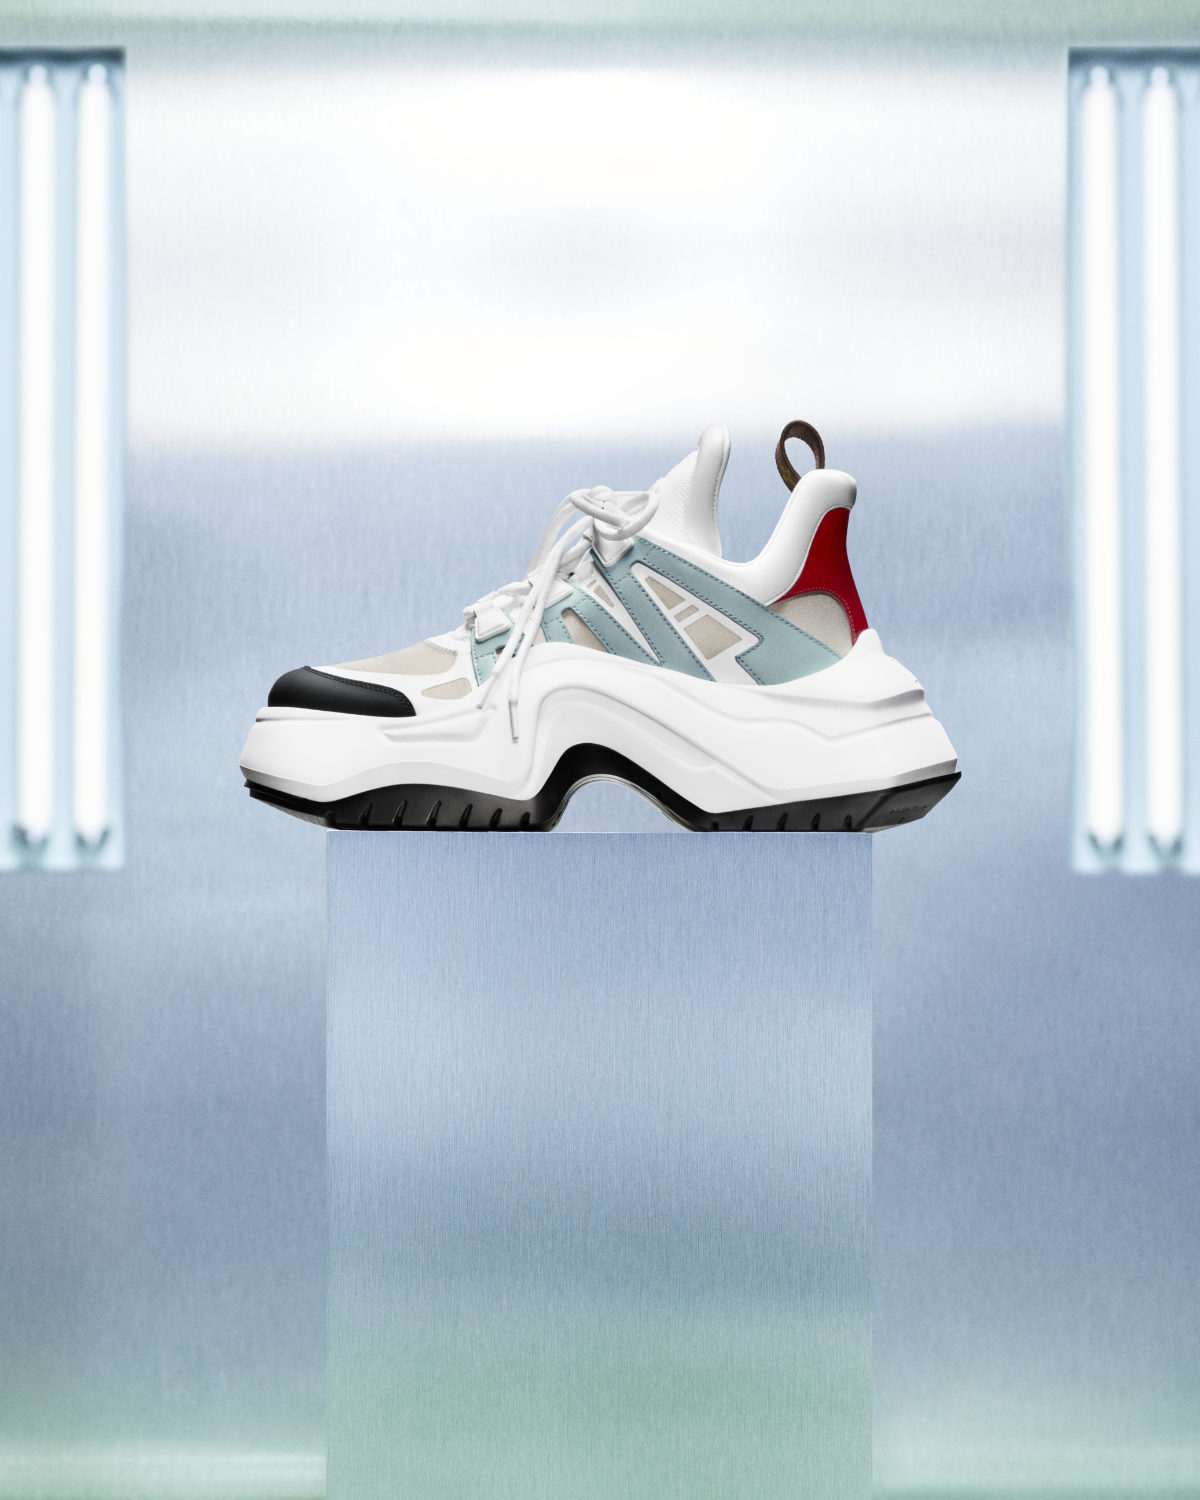 Louis Vuitton Unveiled Its New Campaign Dedicated To LV Archlight Sneaker Collection